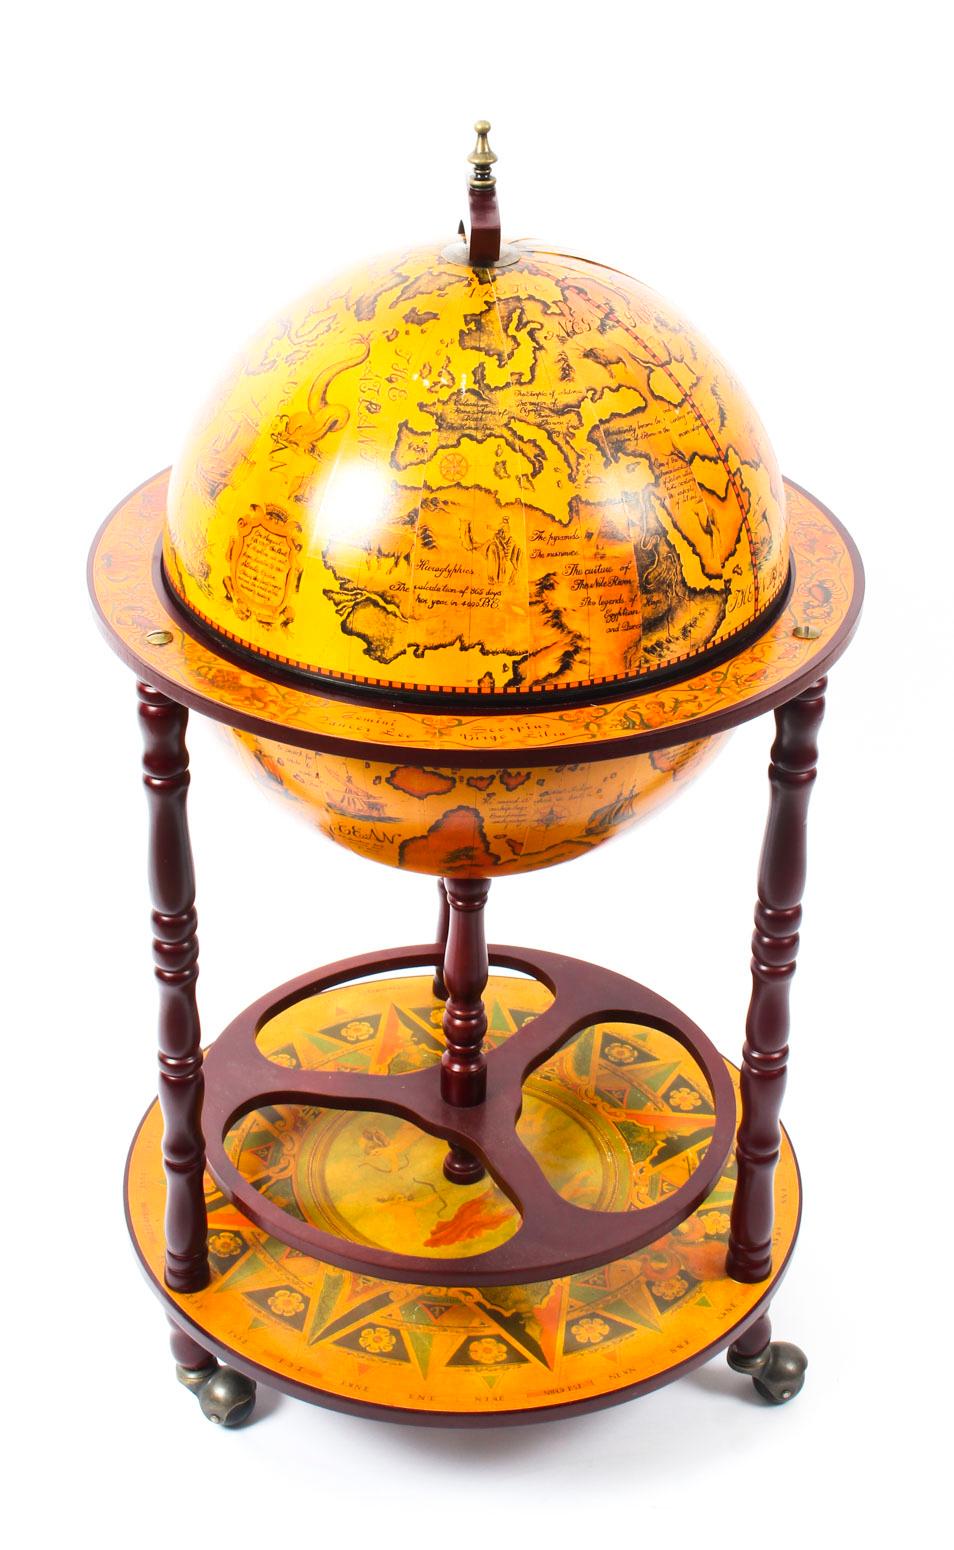 This is a modernist midcentury cocktail drinks cabinet in the form of a globe, circa 1960 in date.

The hinged top section opens to reveal a fitted interior with spaces for glasses and a ice bucket. The turned tripod legs are joined by an